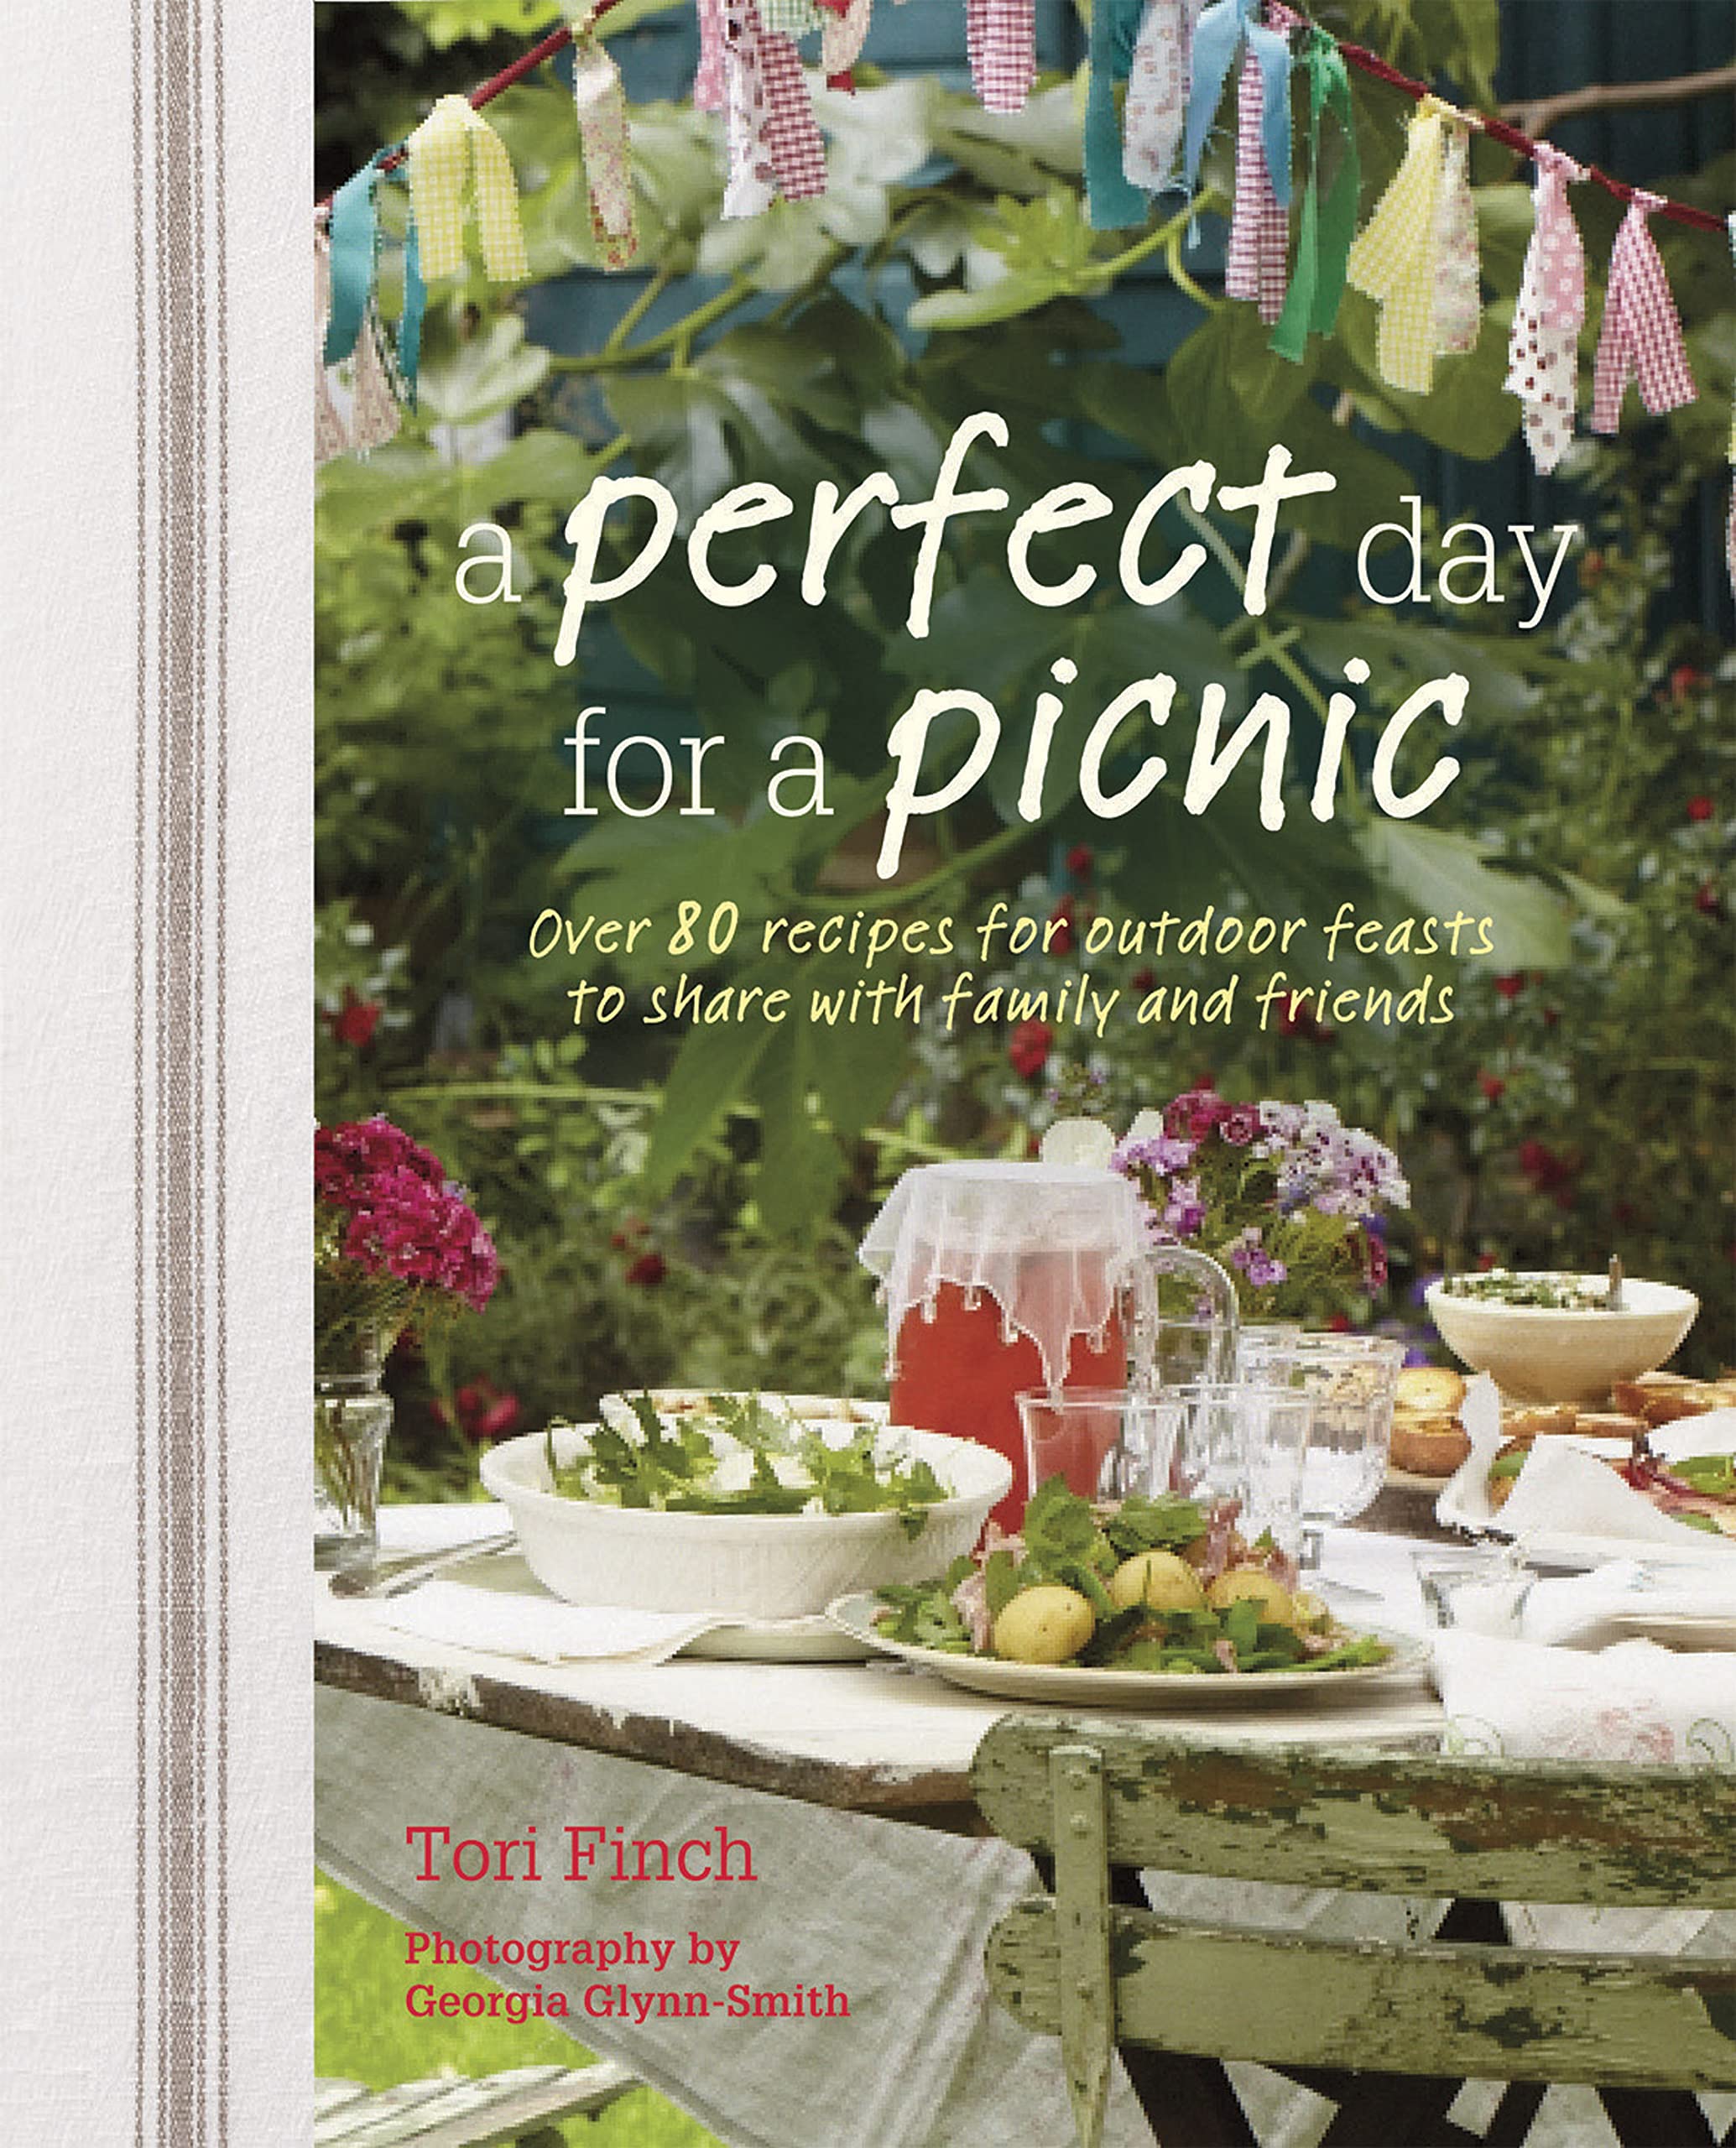 A Perfect Day for a Picnic: Over 80 Recipes for Outdoor Feasts to Share with Family and Friends (Tori Finch)